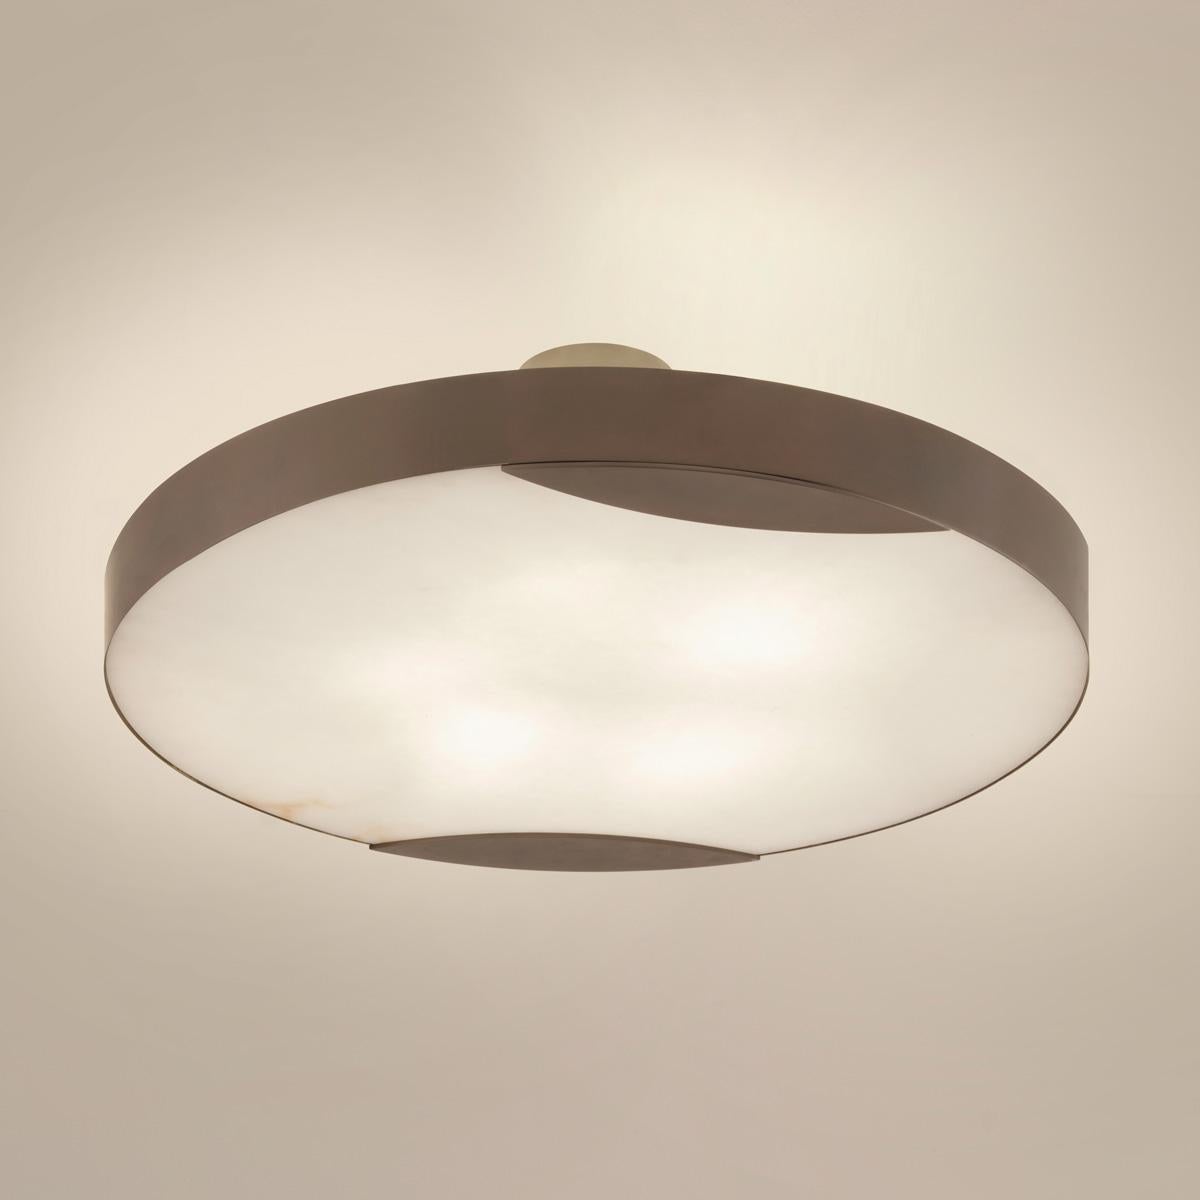 The Cloud N.1 ceiling light embodies a minimalist design with a clean brass band and a glowing Tuscan alabaster diffuser. Available in 4 sizes and can be installed as a semi flush mount or pendant.

Shown in the primary images in Peltro-subsequent